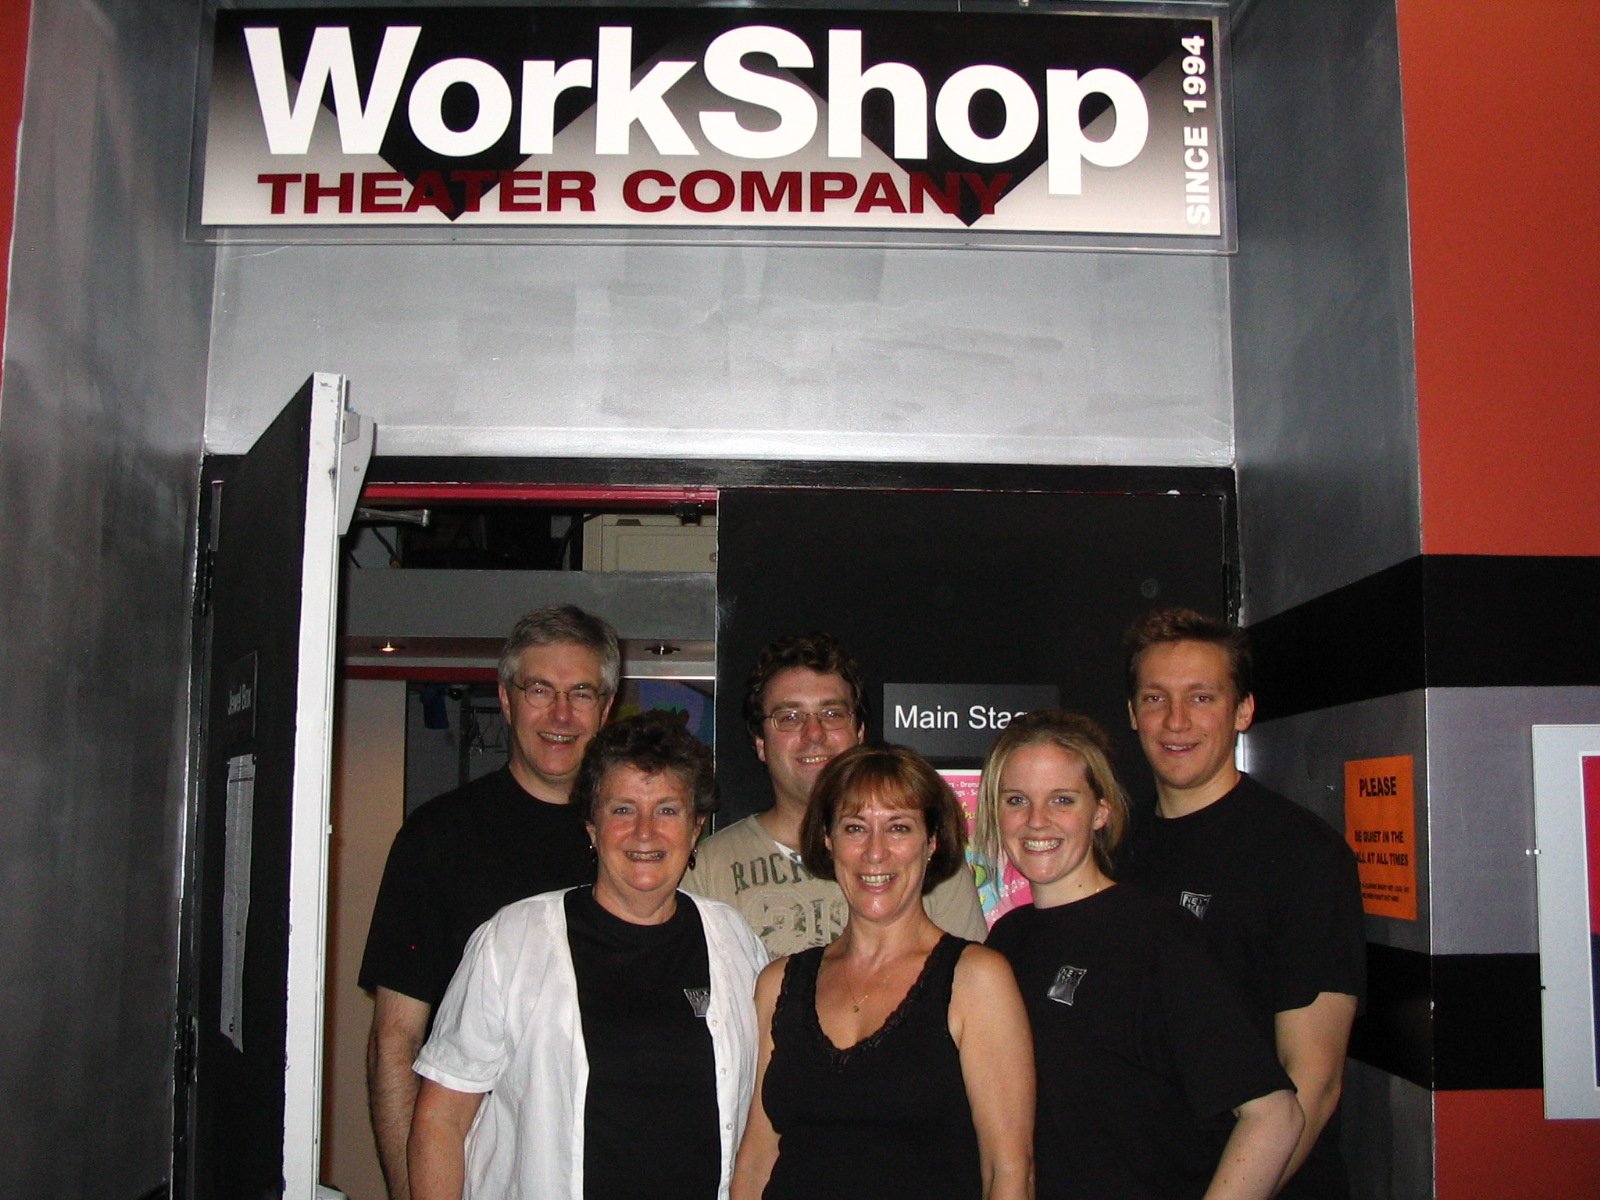 2008: Next Stage Theatre Company tours to The Mid-town Festival at The Workshop Theatre in New York with Alan Ayckbourn’s "Intimate Exchanges".